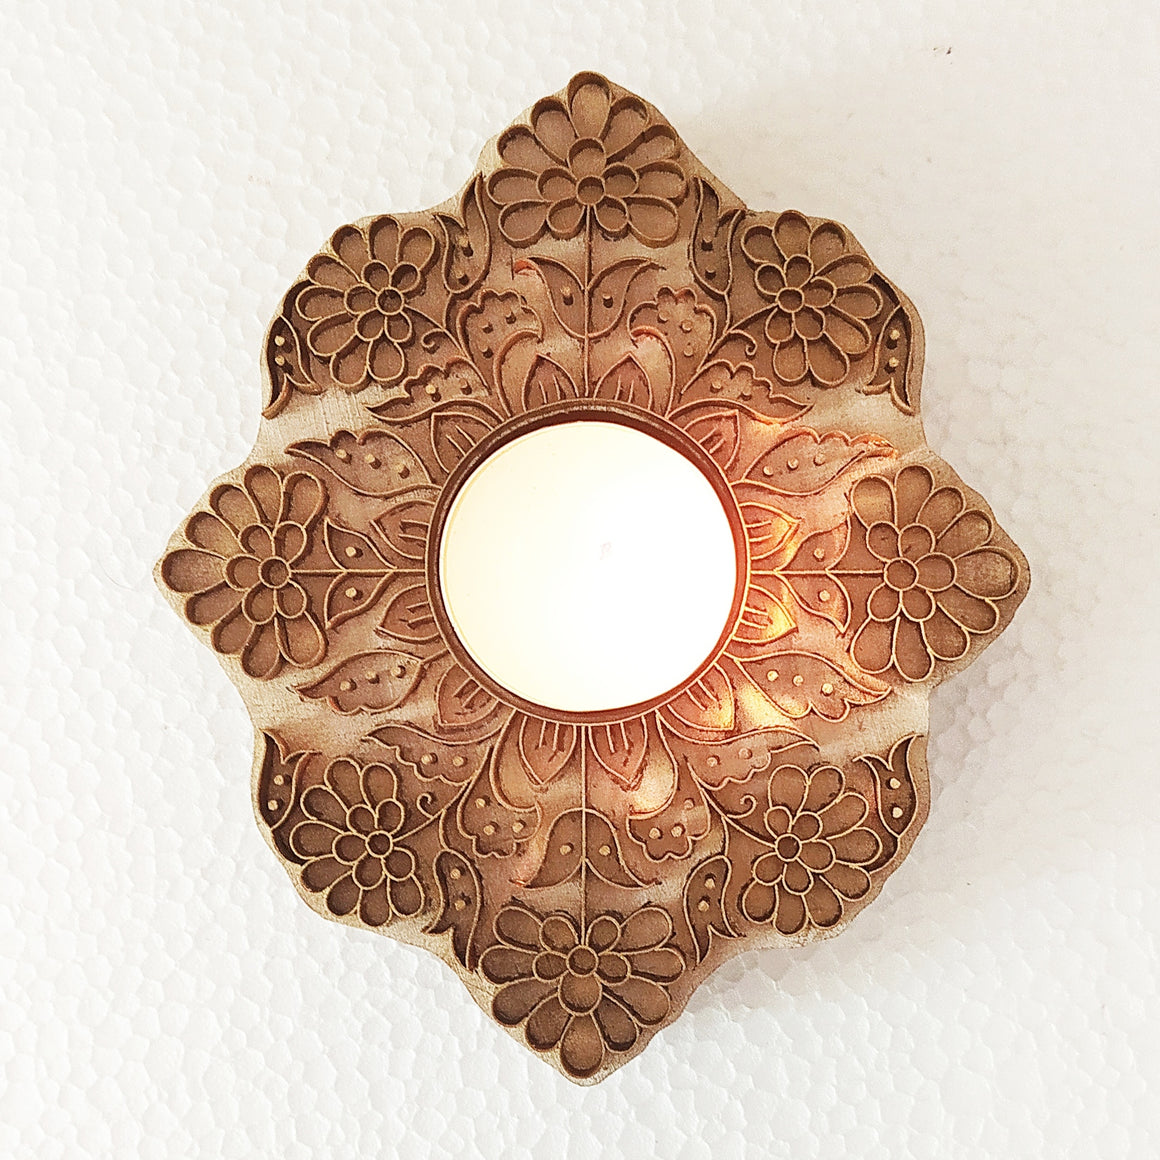 Exquisite Wooden Tea Light Holder Handcrafted With Brass Floral Design Inlay . L 13 cm x W 11 cm x Ht 3 cm